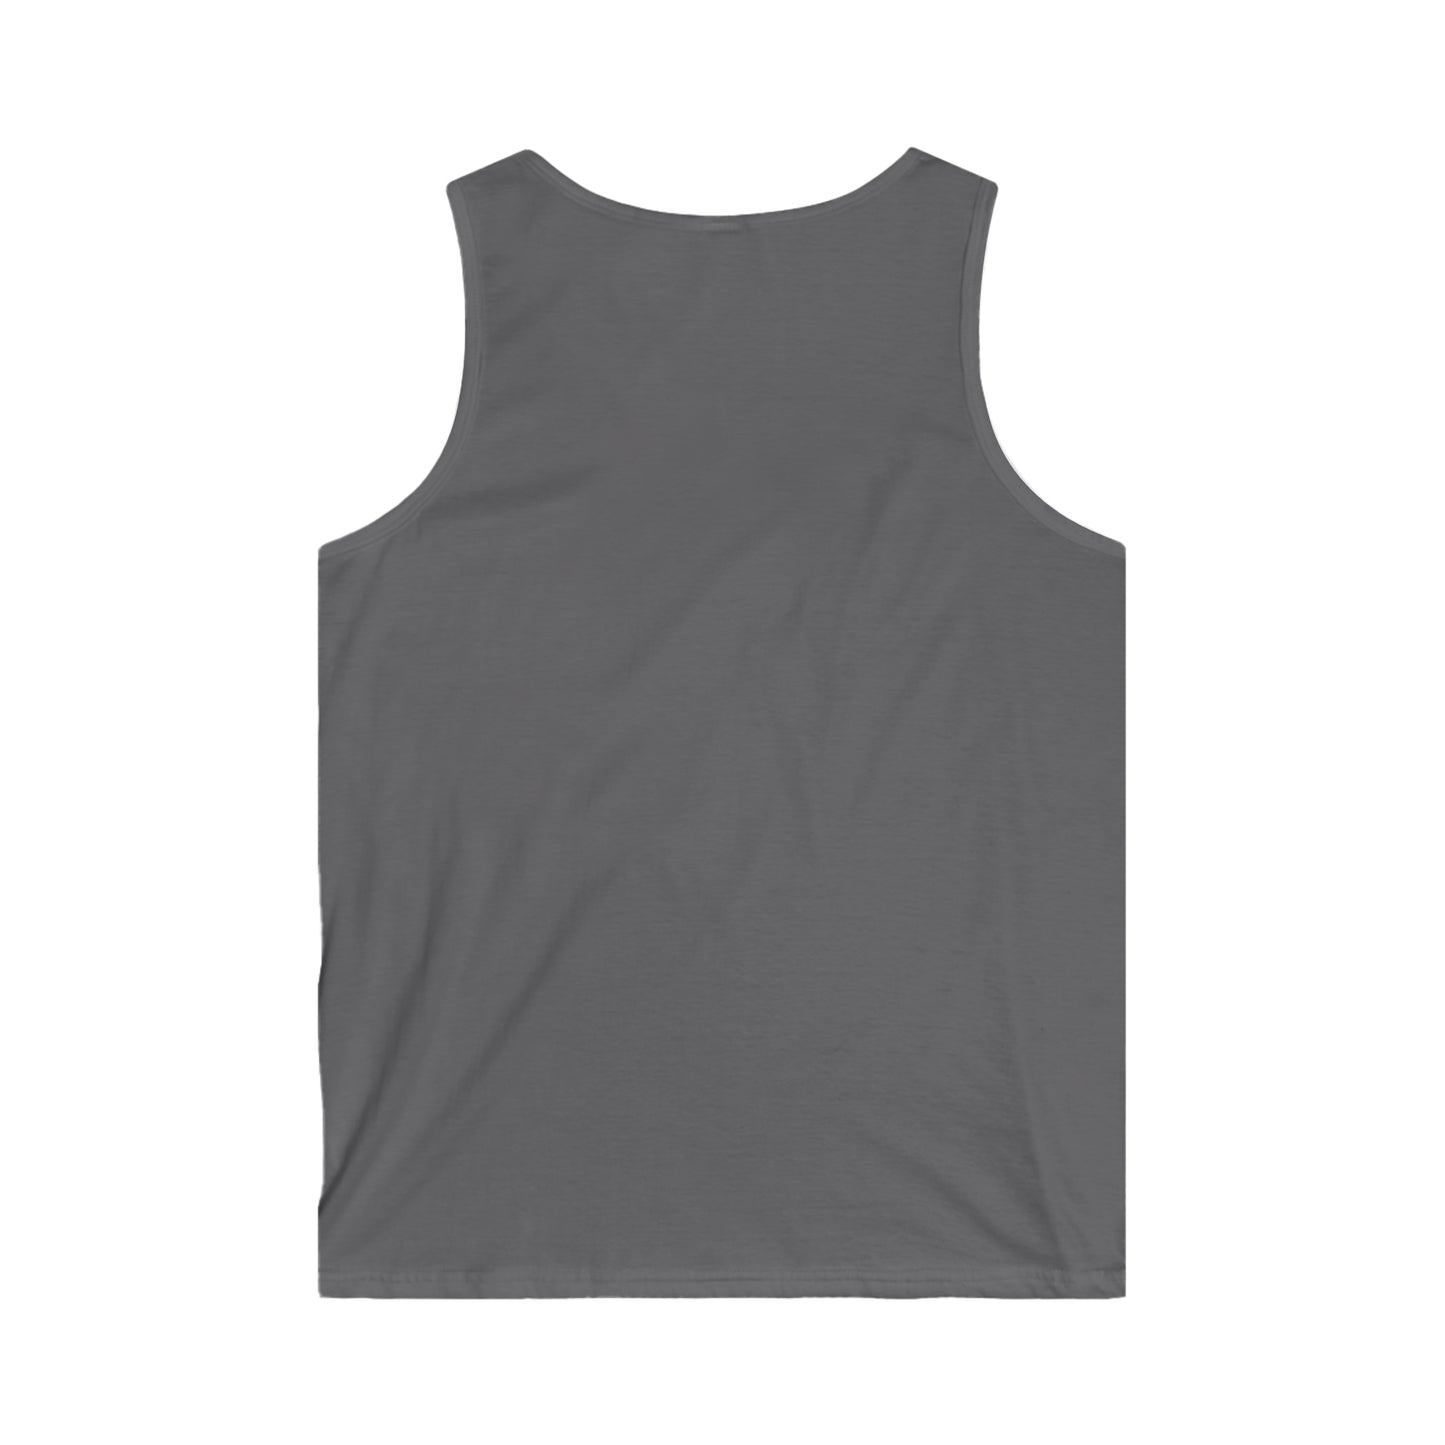 Tennessee Williams |  American Playwright | Pride Jersey Tank